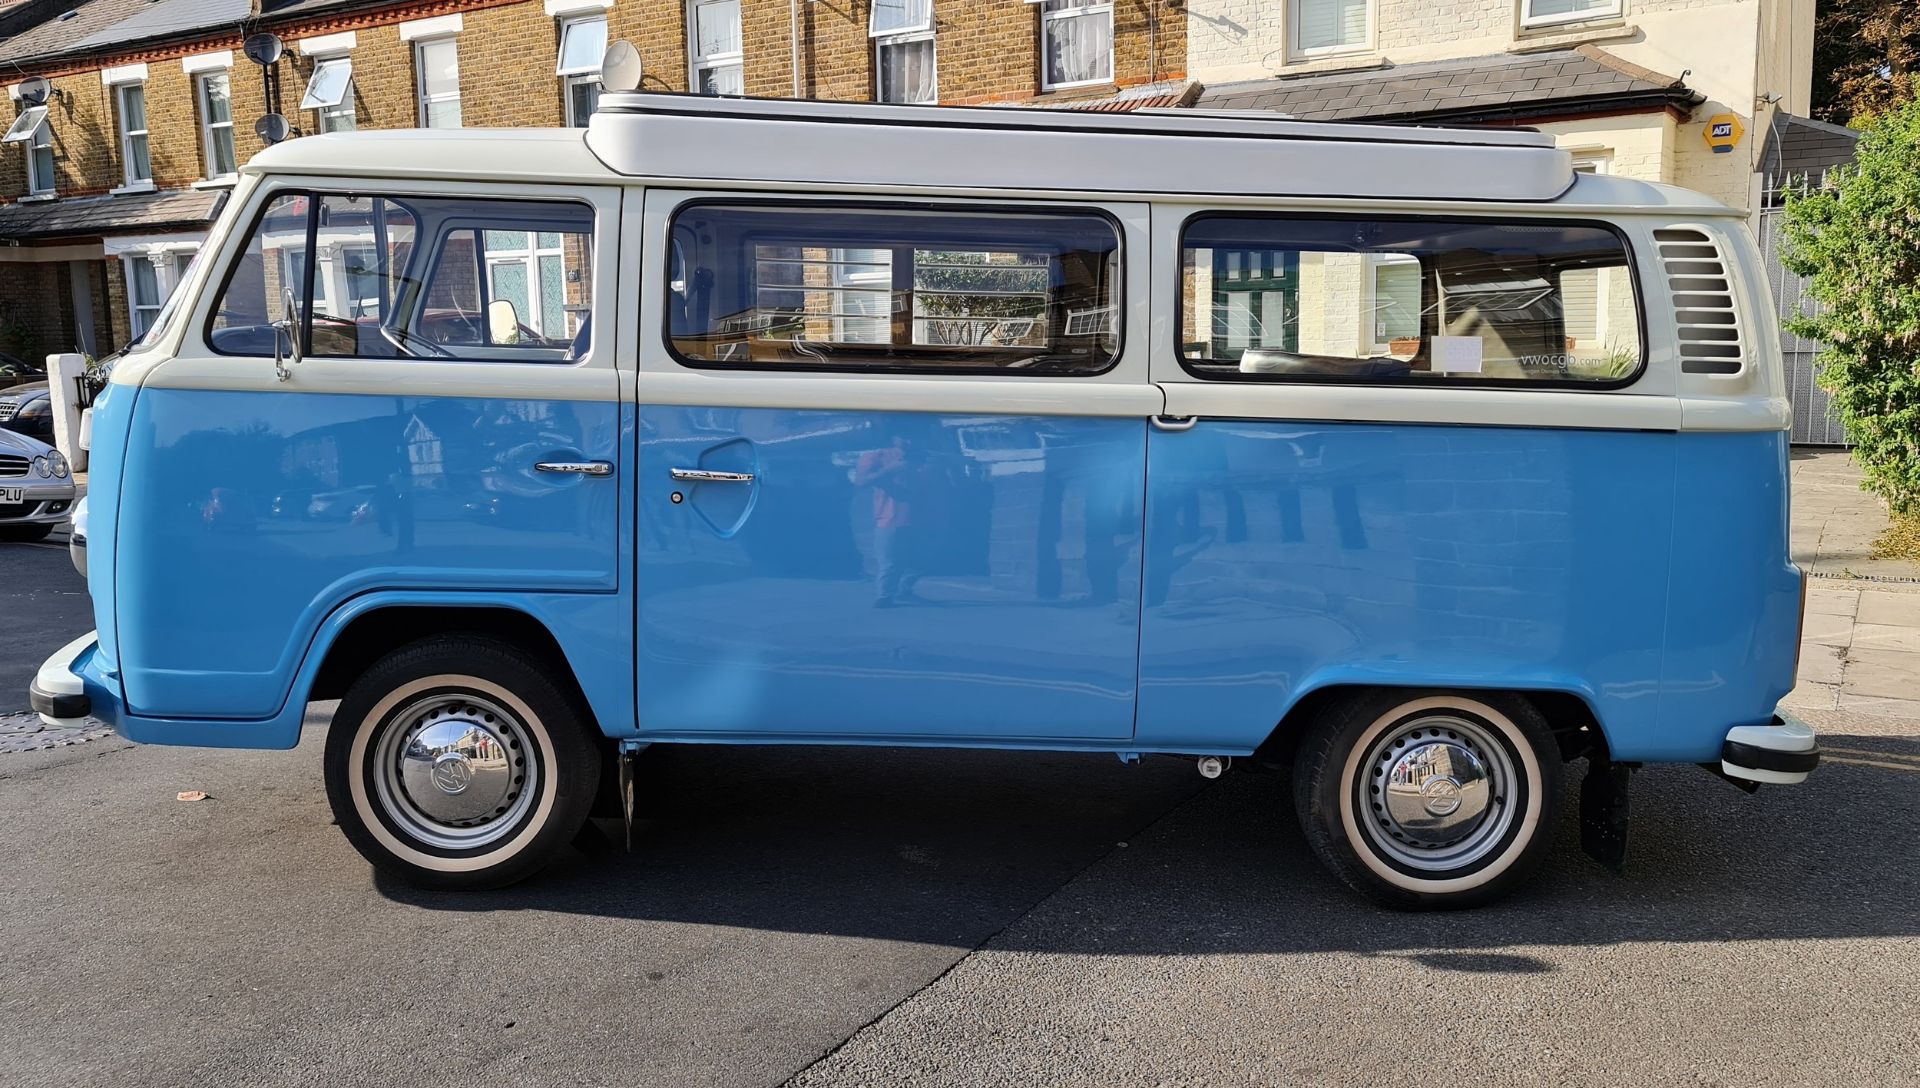 1976 VW Late Bay Window Camper Van Registration number LGY 254P White over blue with blue interior - Image 2 of 11